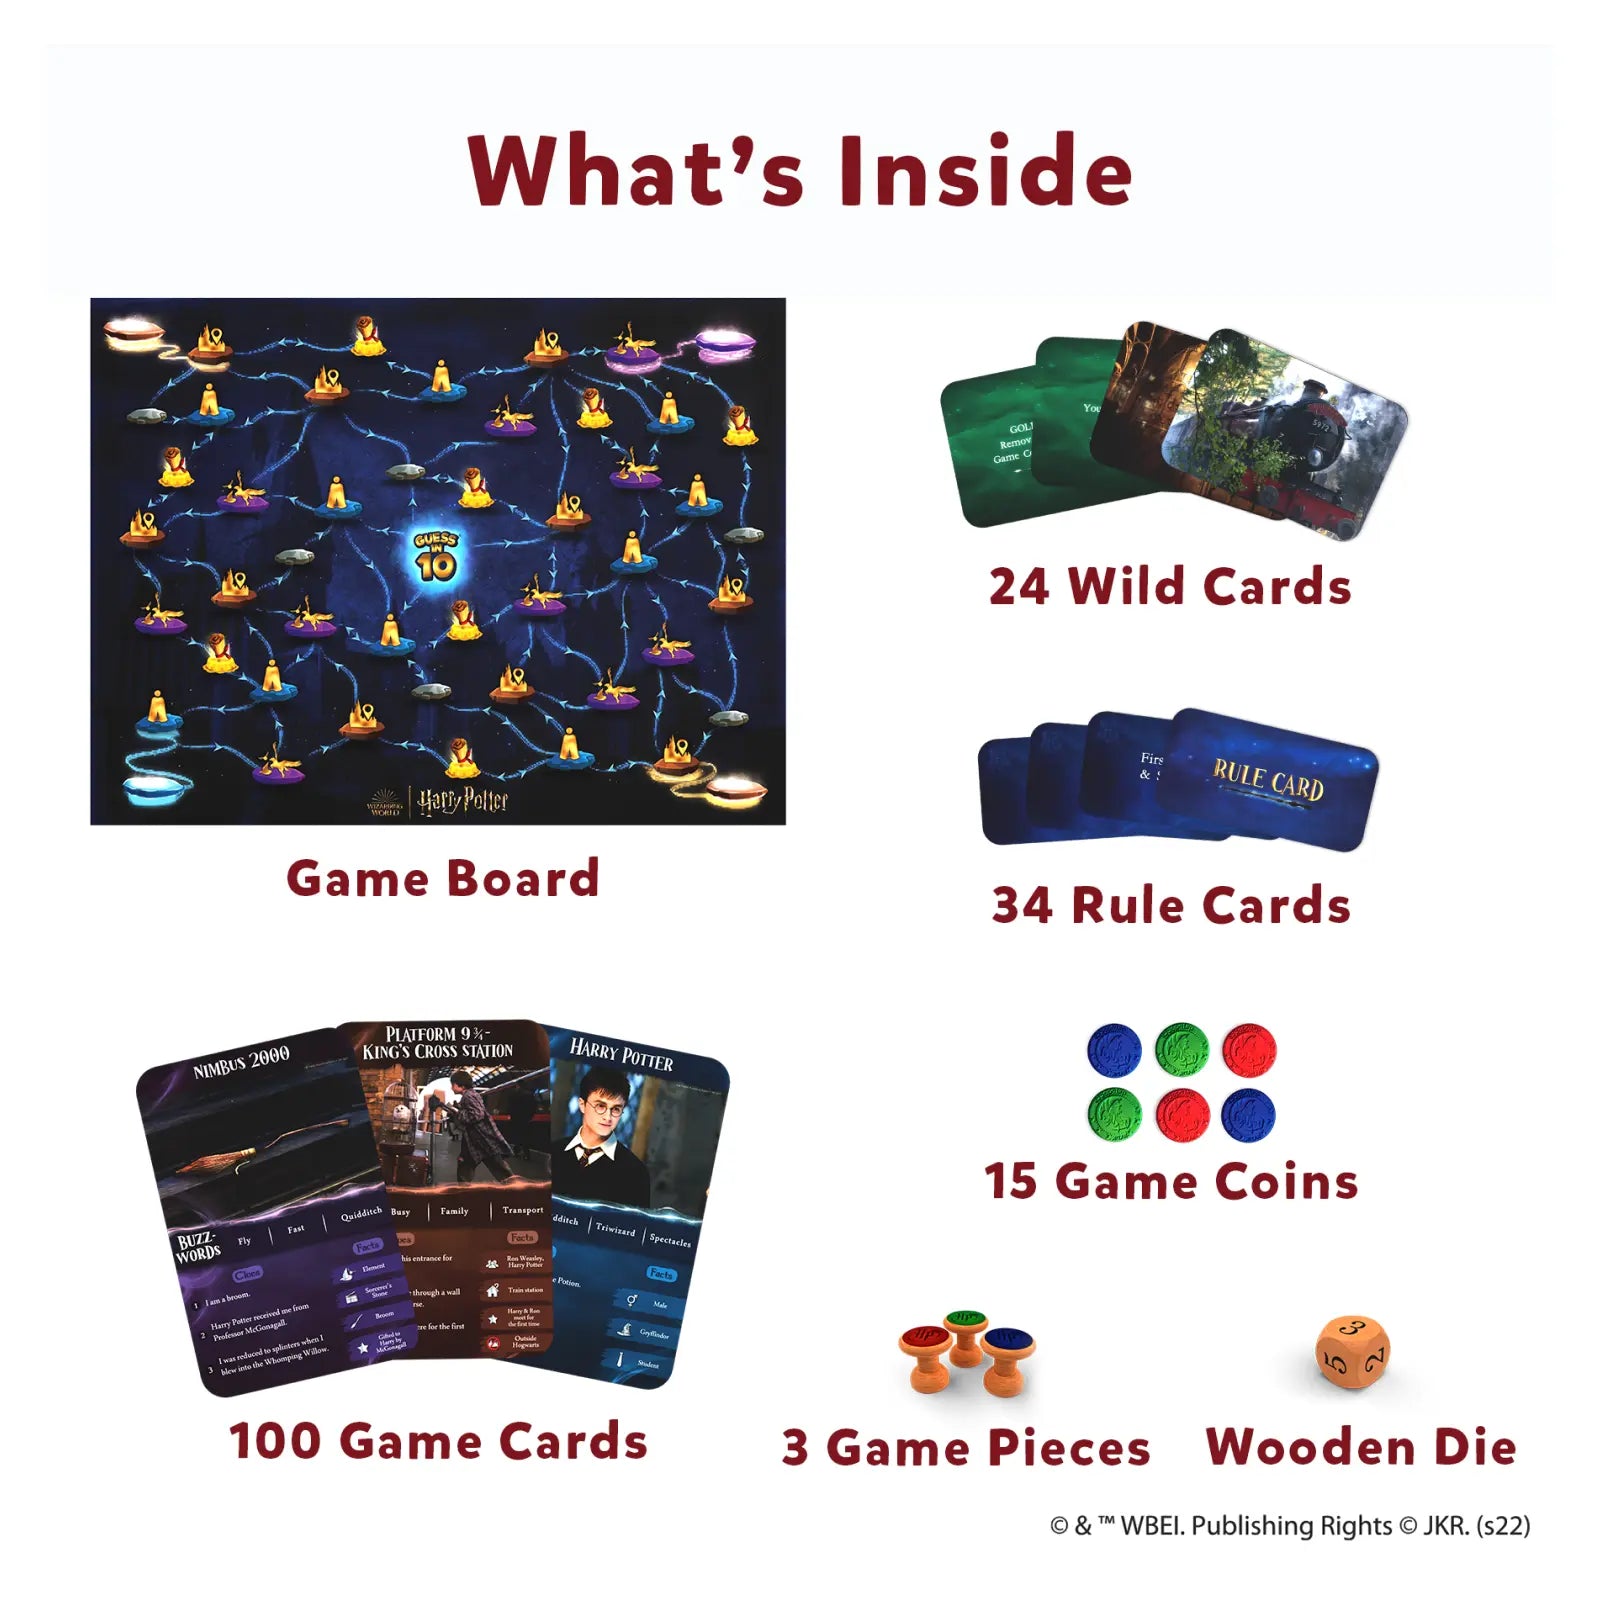 Guess in 10: Harry Potter Board Game | Trivia game (ages 8+)